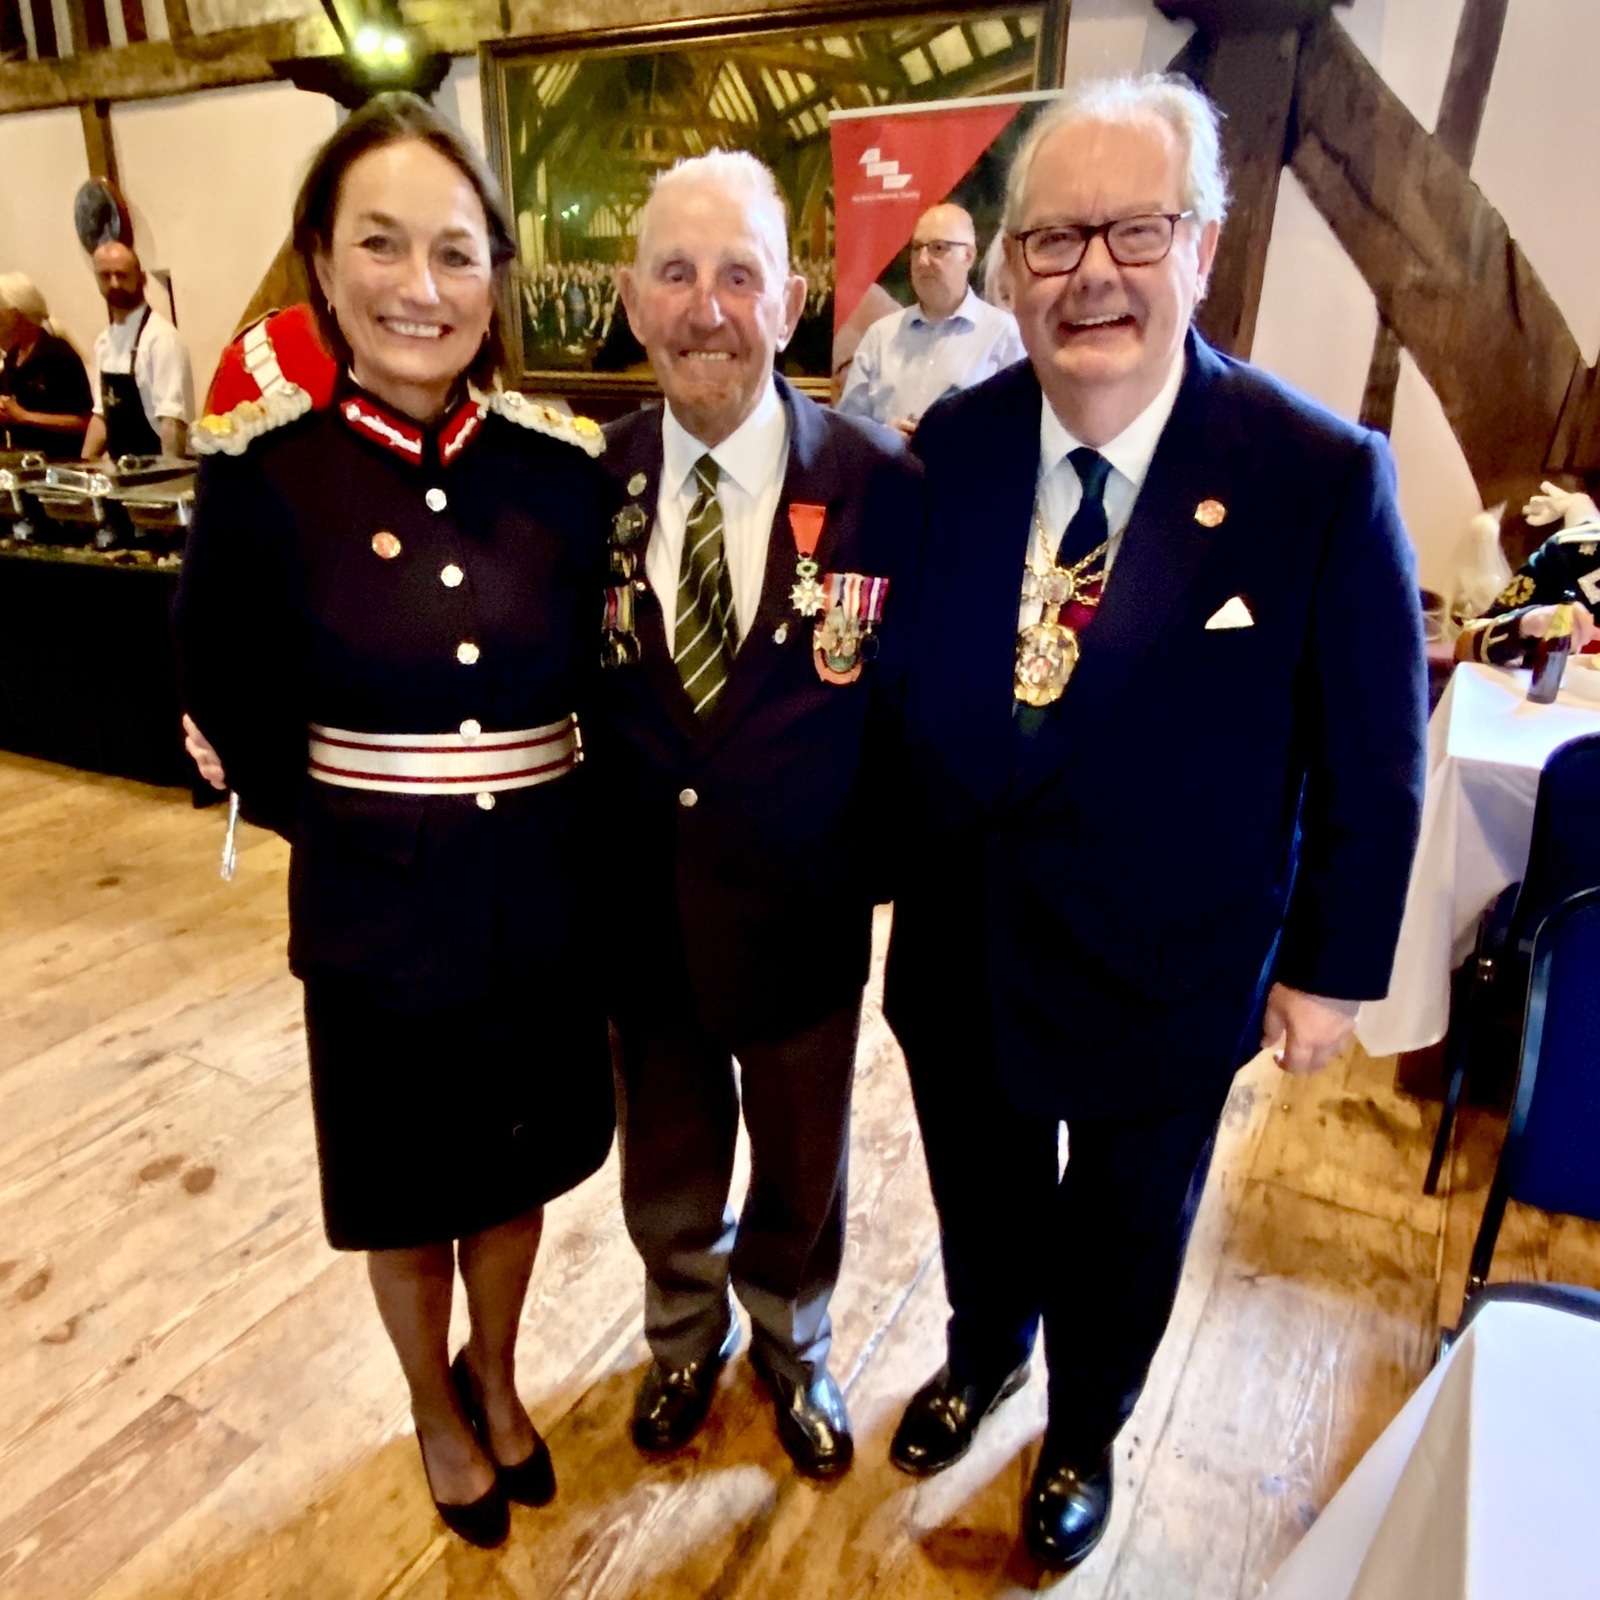 1 June 2023 - Day 2 of the York Trip - A huge honour to meet the last member of the York Normandy Veterans, the extraordinary 97 years young Ken Cooke, at The York Big Curry Lunch in aid of The Army Benevolent Fund for veterans and their dependants.